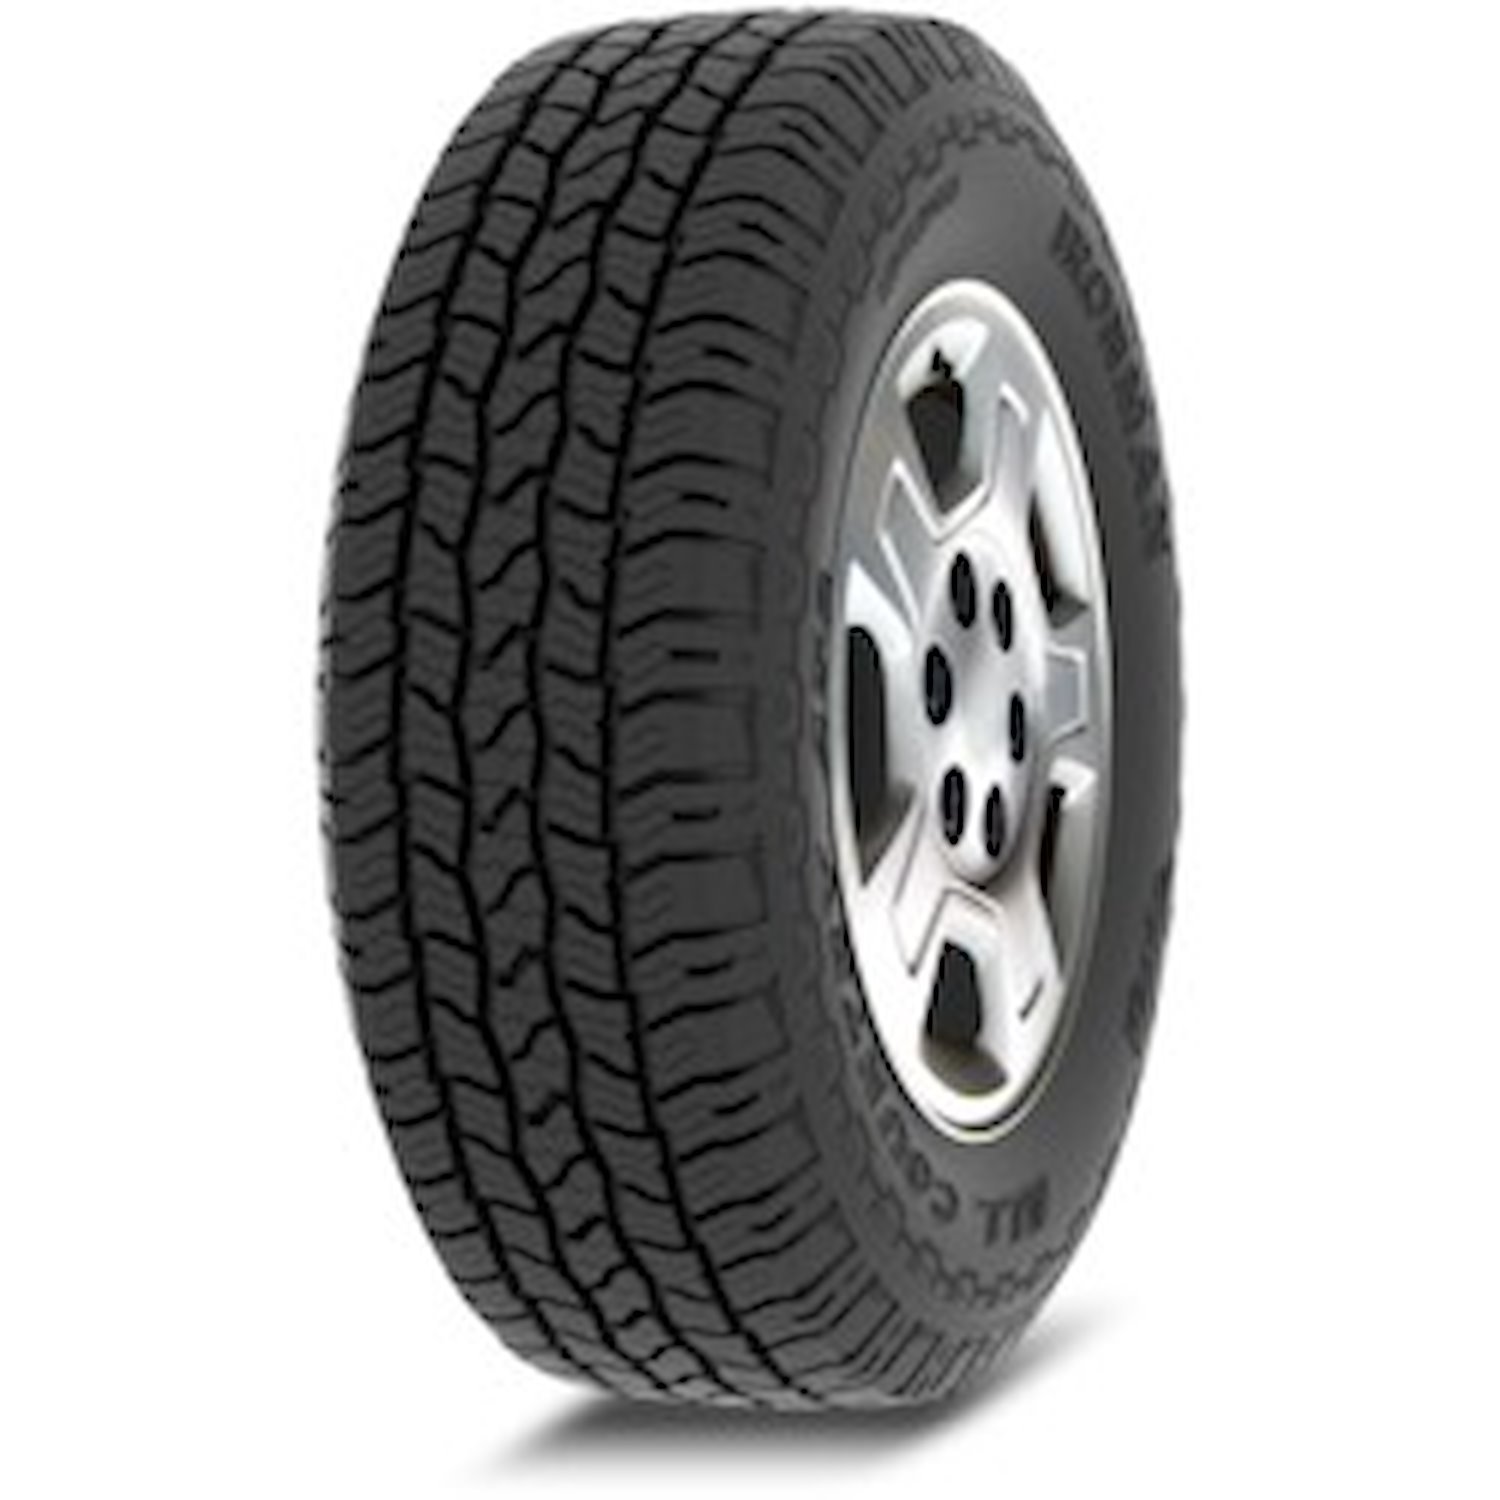 07632 All Country AT2 Tire, 275/60R20, 115T